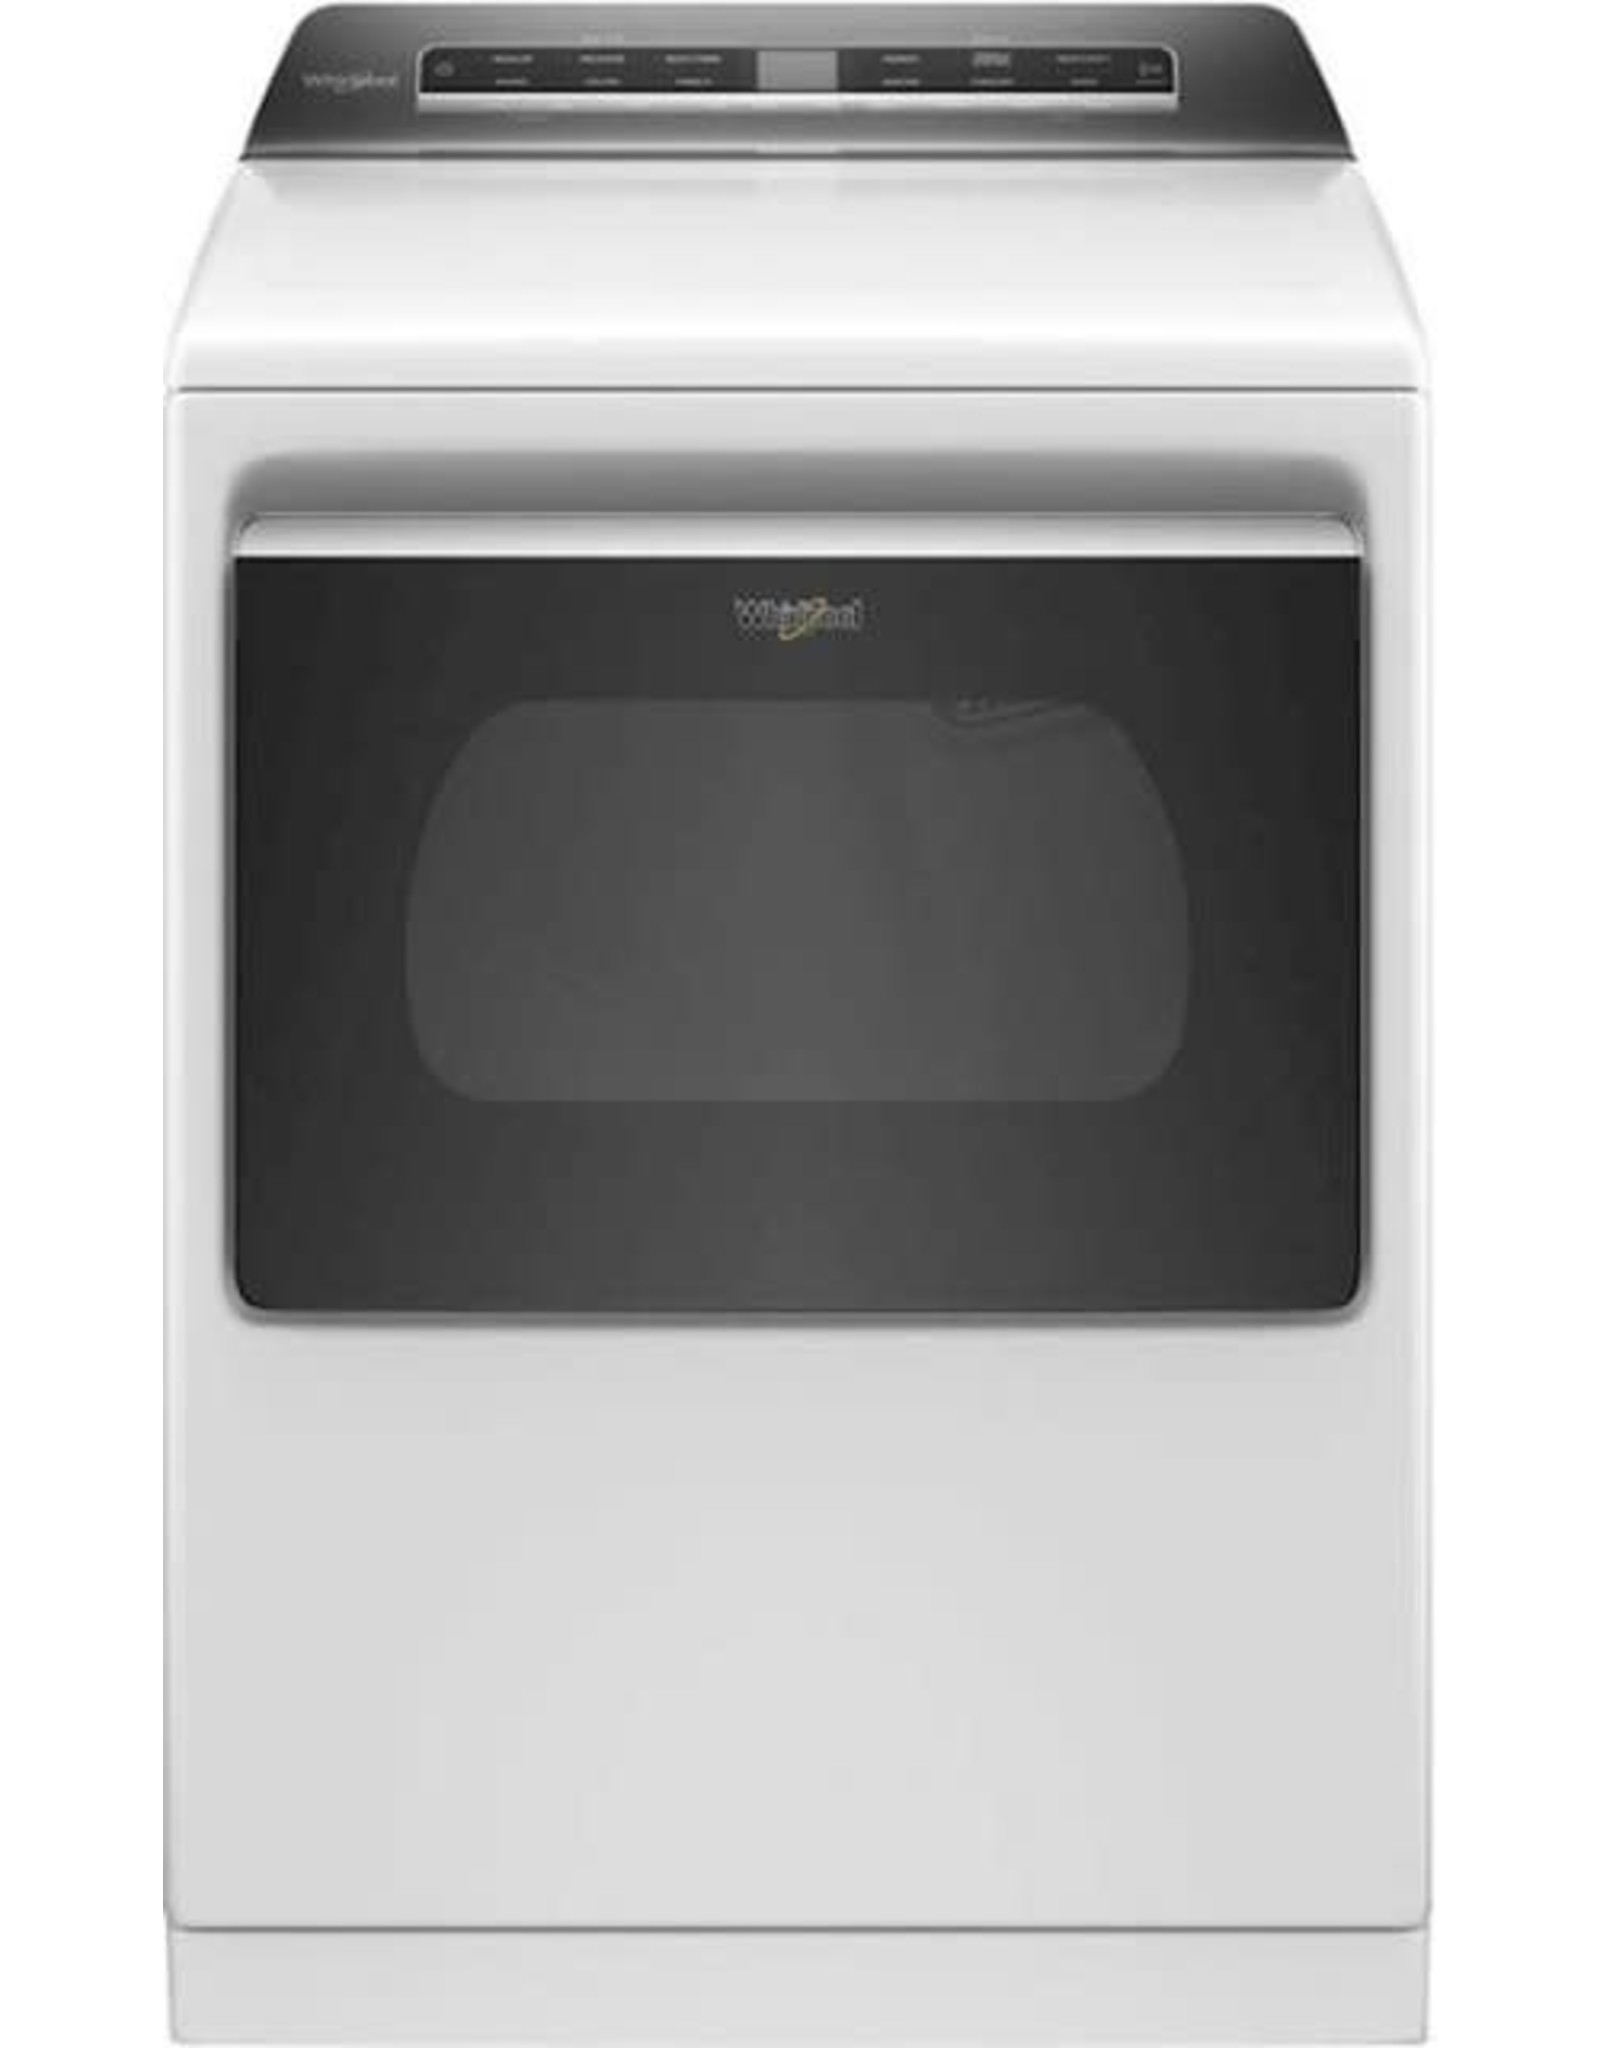 WHIRLPOOL WGD7120HW 7.4 cu. ft. 120-Volt Smart Gas Vented Dryer in White with a Hamper Door and Steam, ENERGY STAR